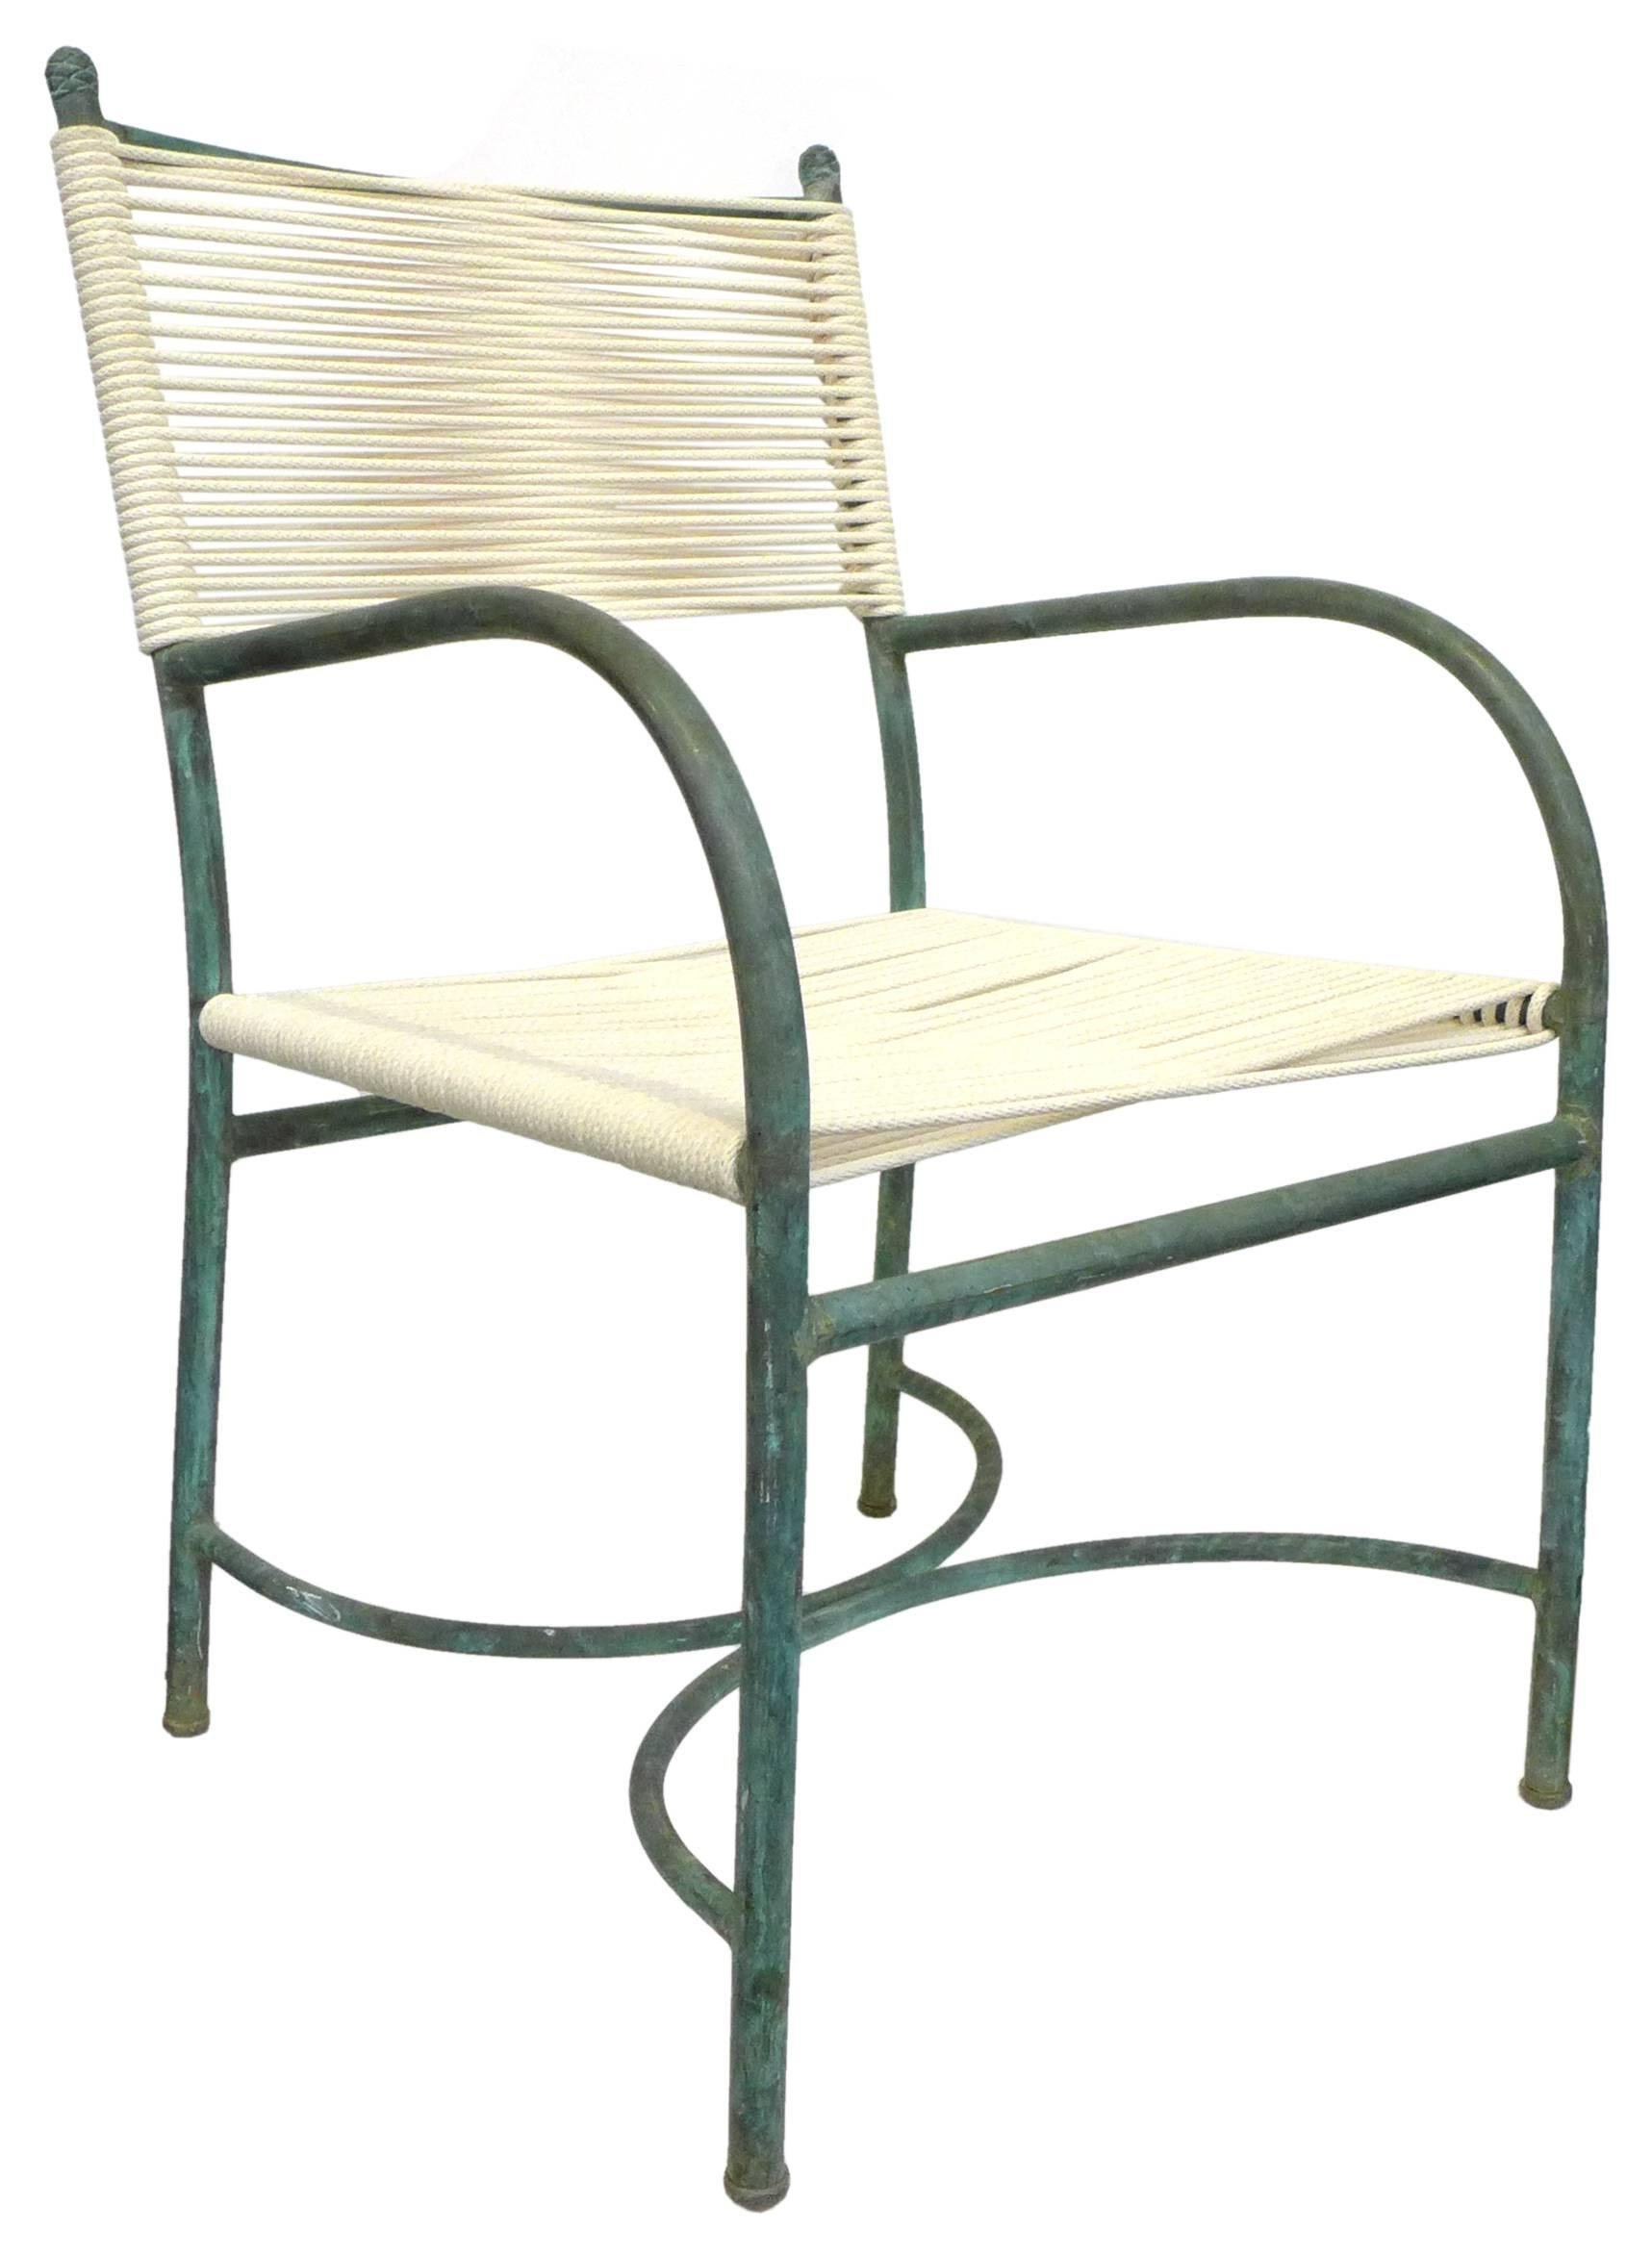 Set of Four Bronze Patinated Outdoor Chairs by Robert Lewis 1